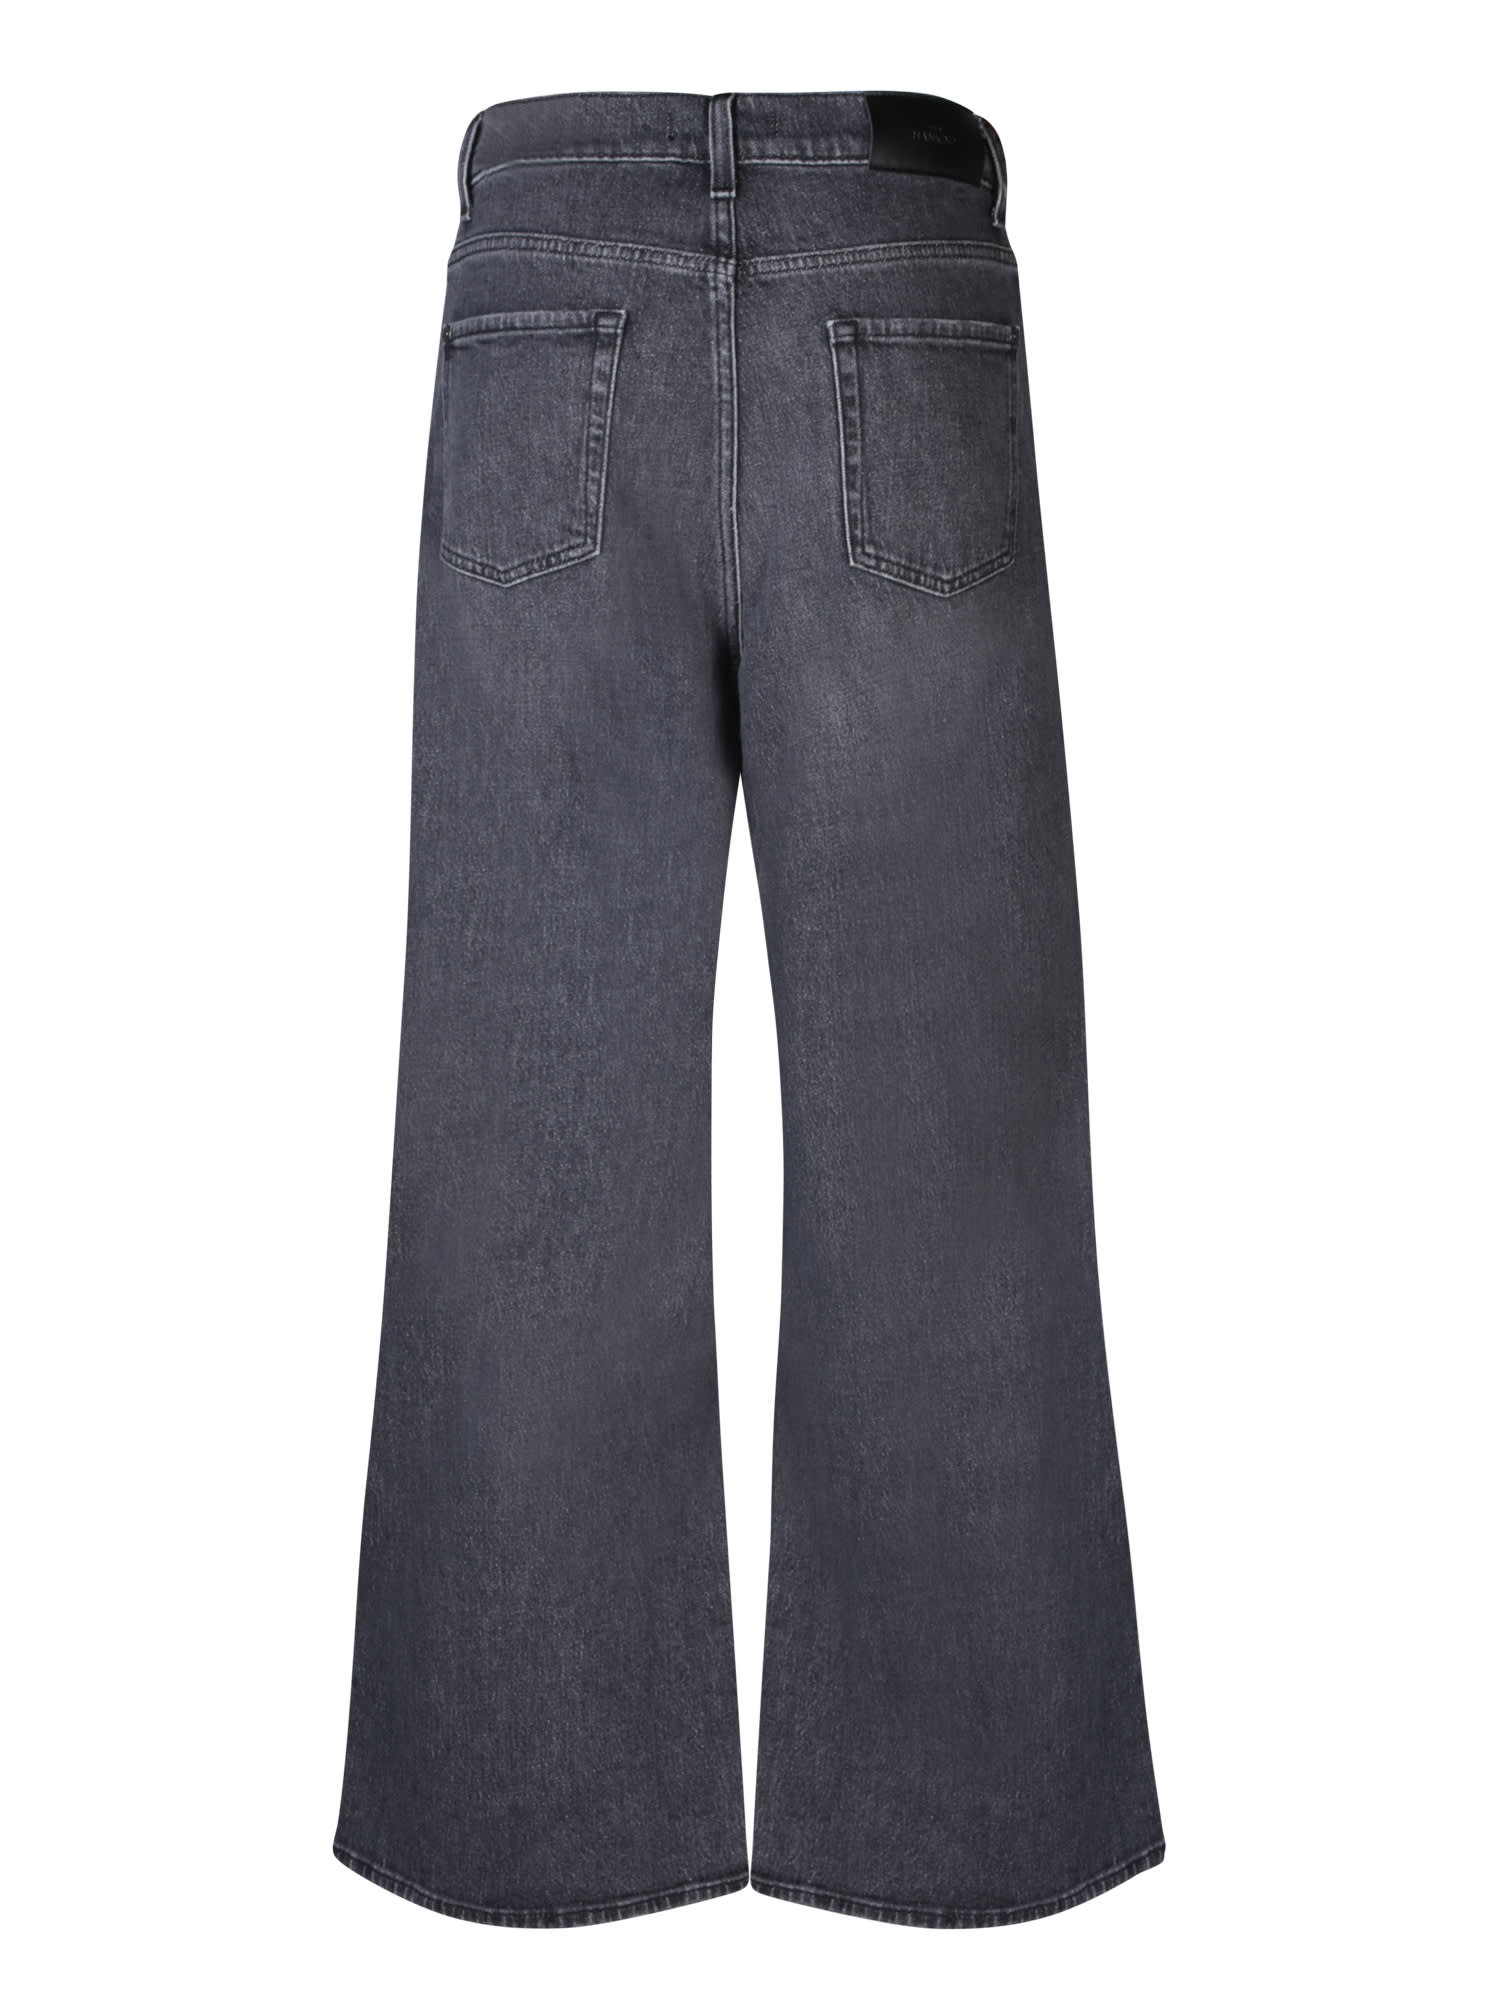 Shop 7 For All Mankind Zoey Grey Jeans